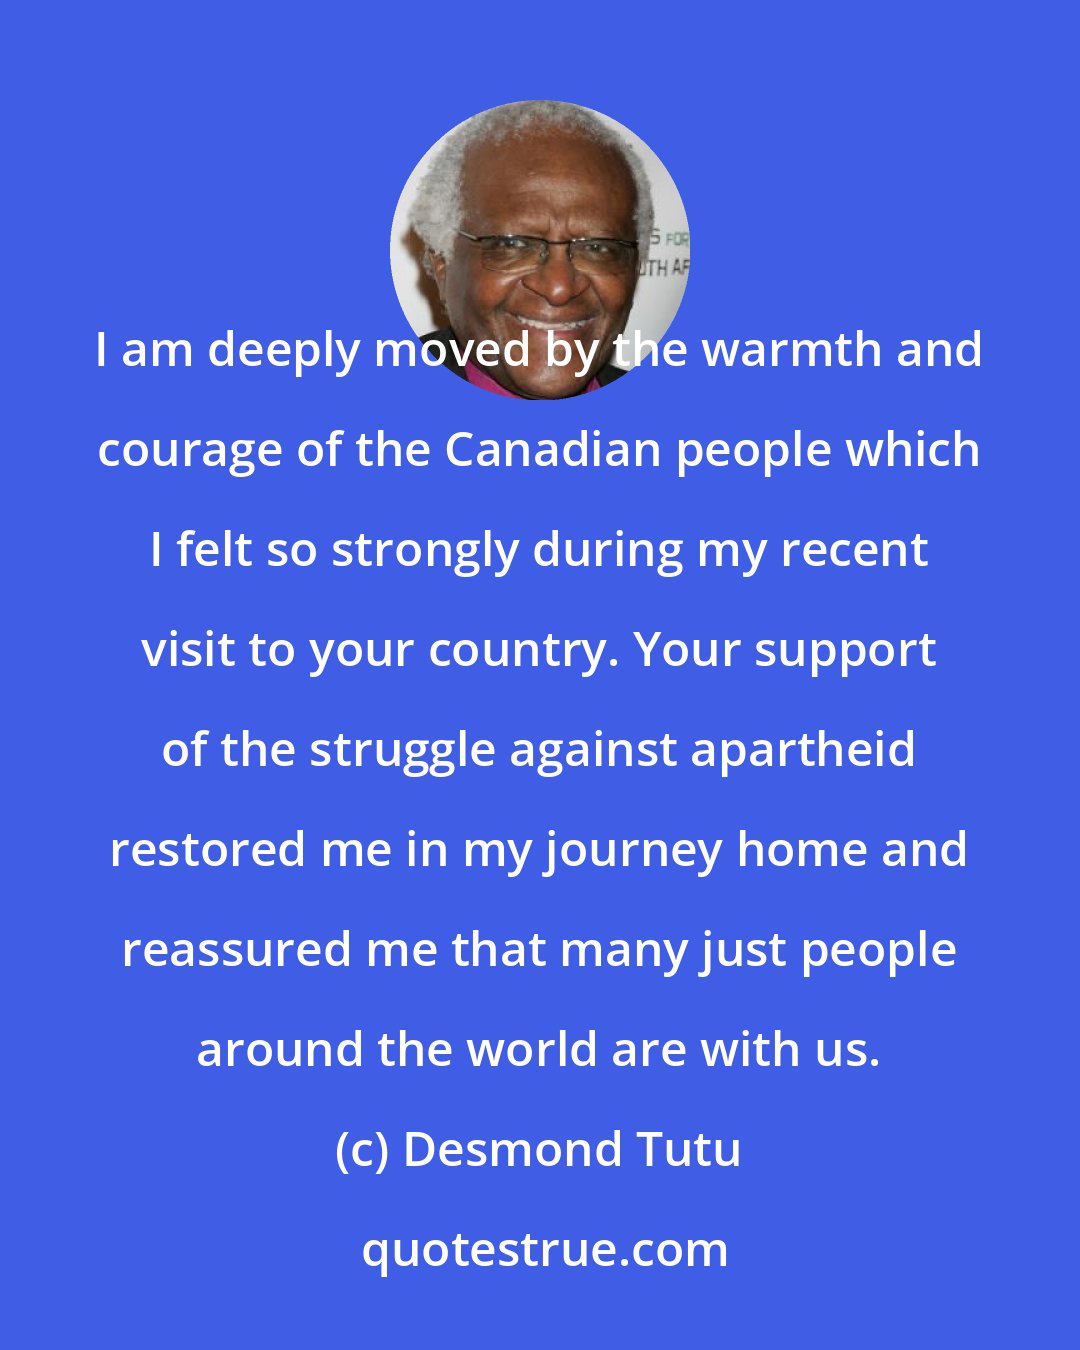 Desmond Tutu: I am deeply moved by the warmth and courage of the Canadian people which I felt so strongly during my recent visit to your country. Your support of the struggle against apartheid restored me in my journey home and reassured me that many just people around the world are with us.